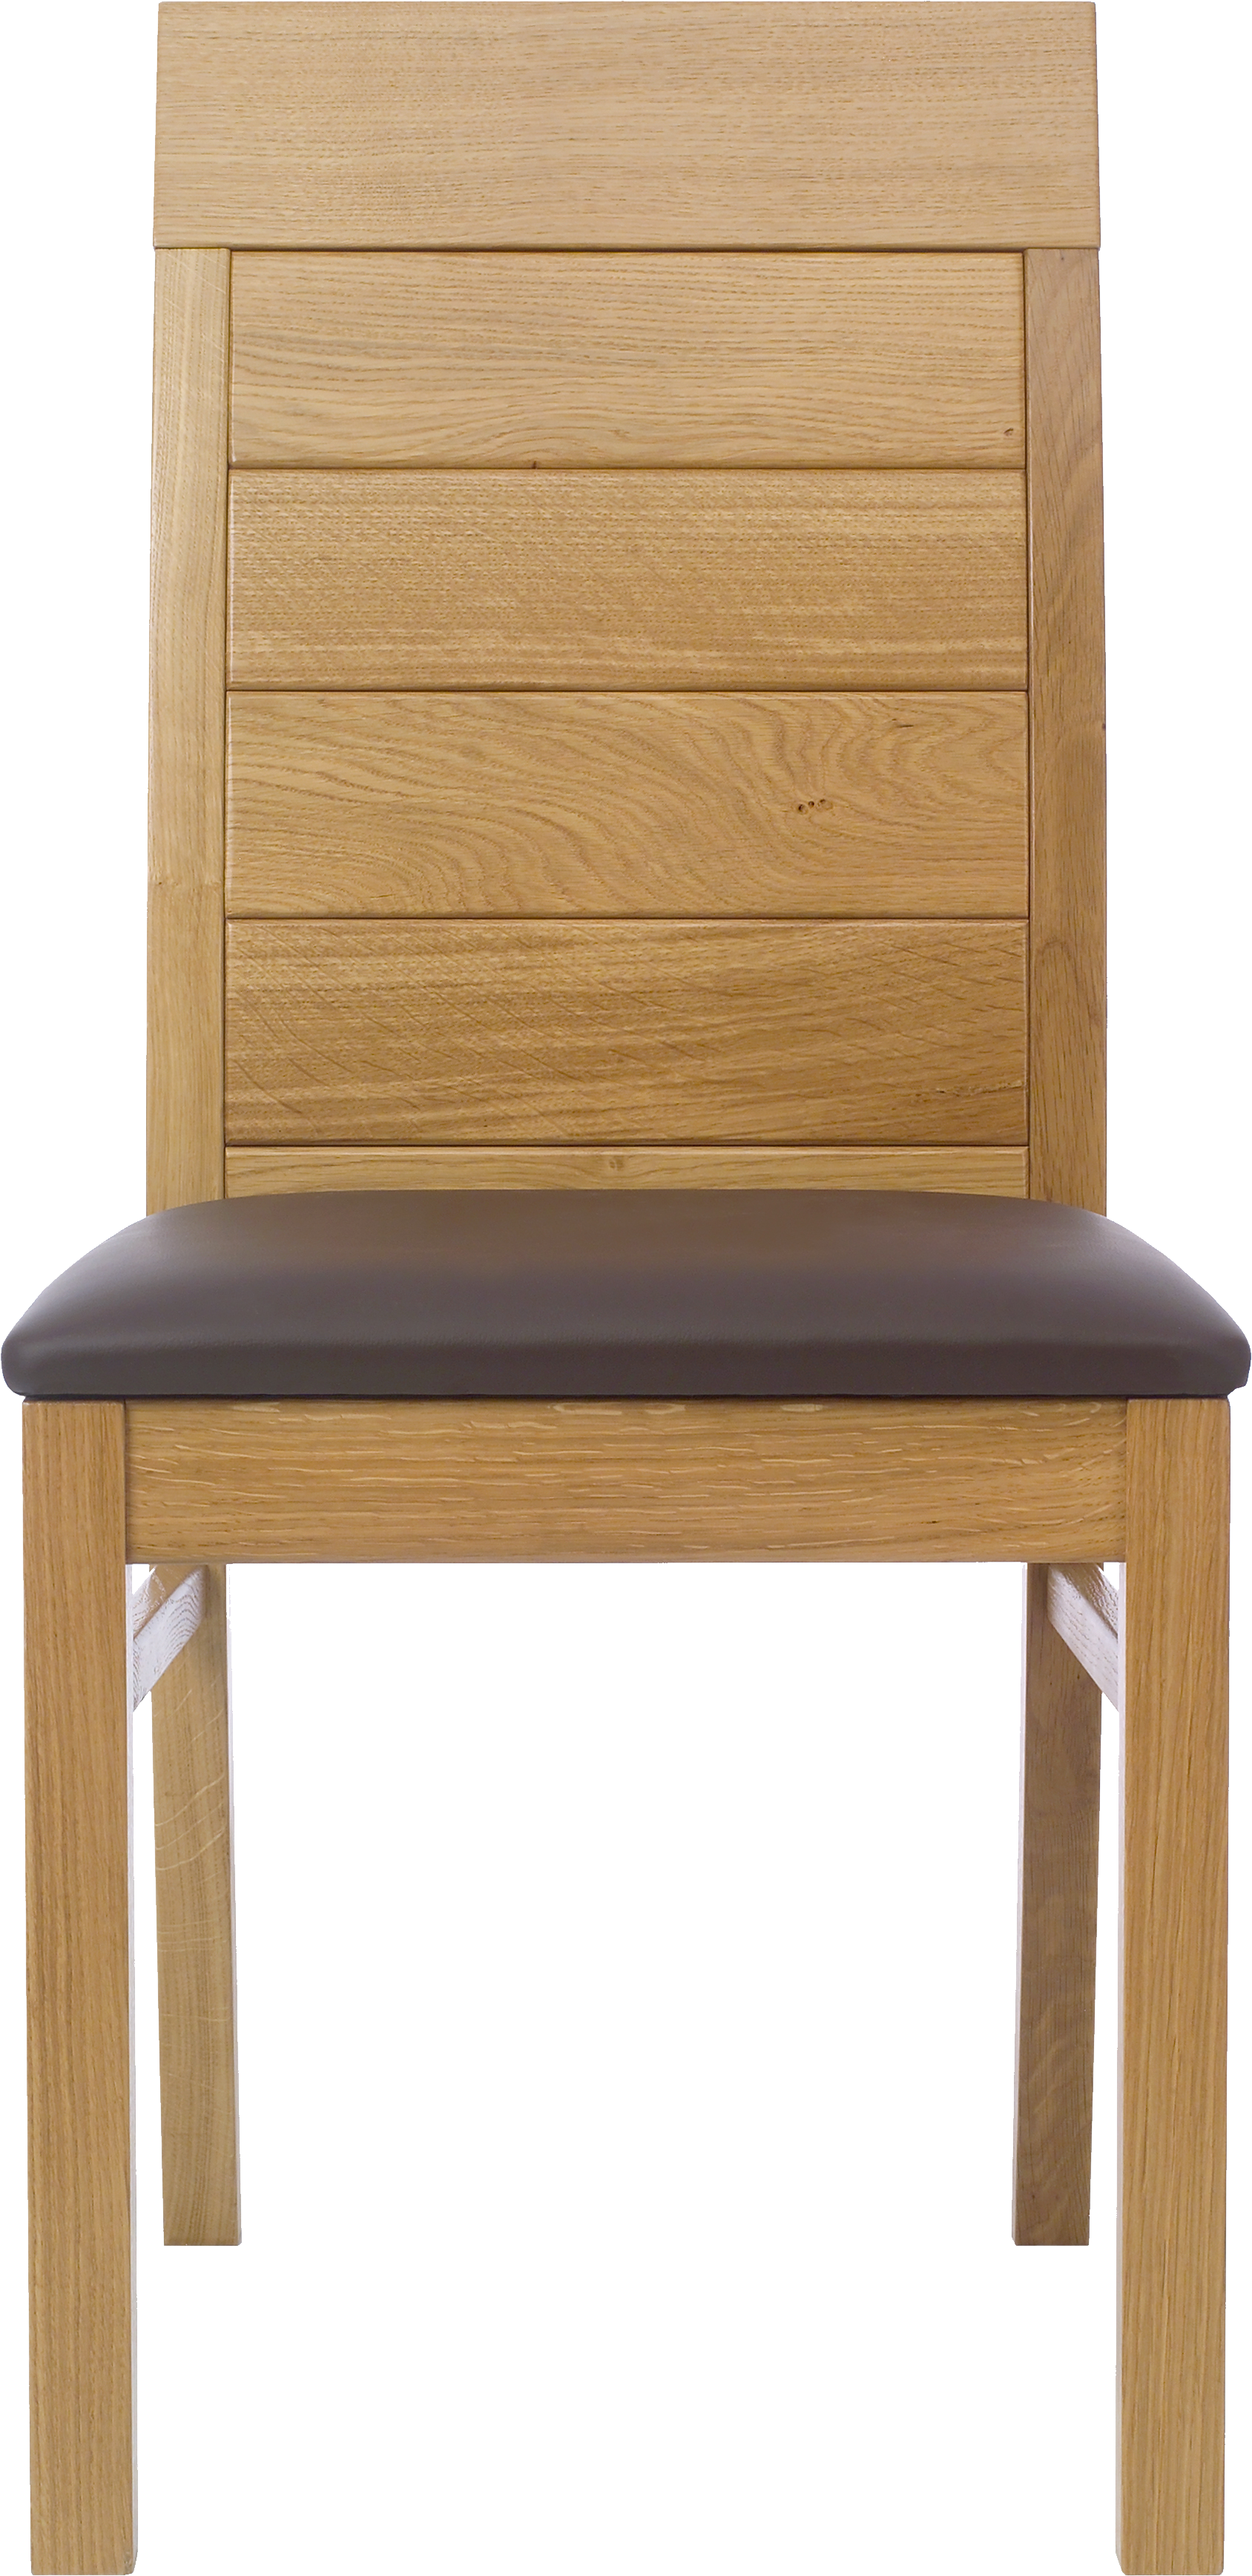 Chair PNG image transparent image download, size: 1688x3472px